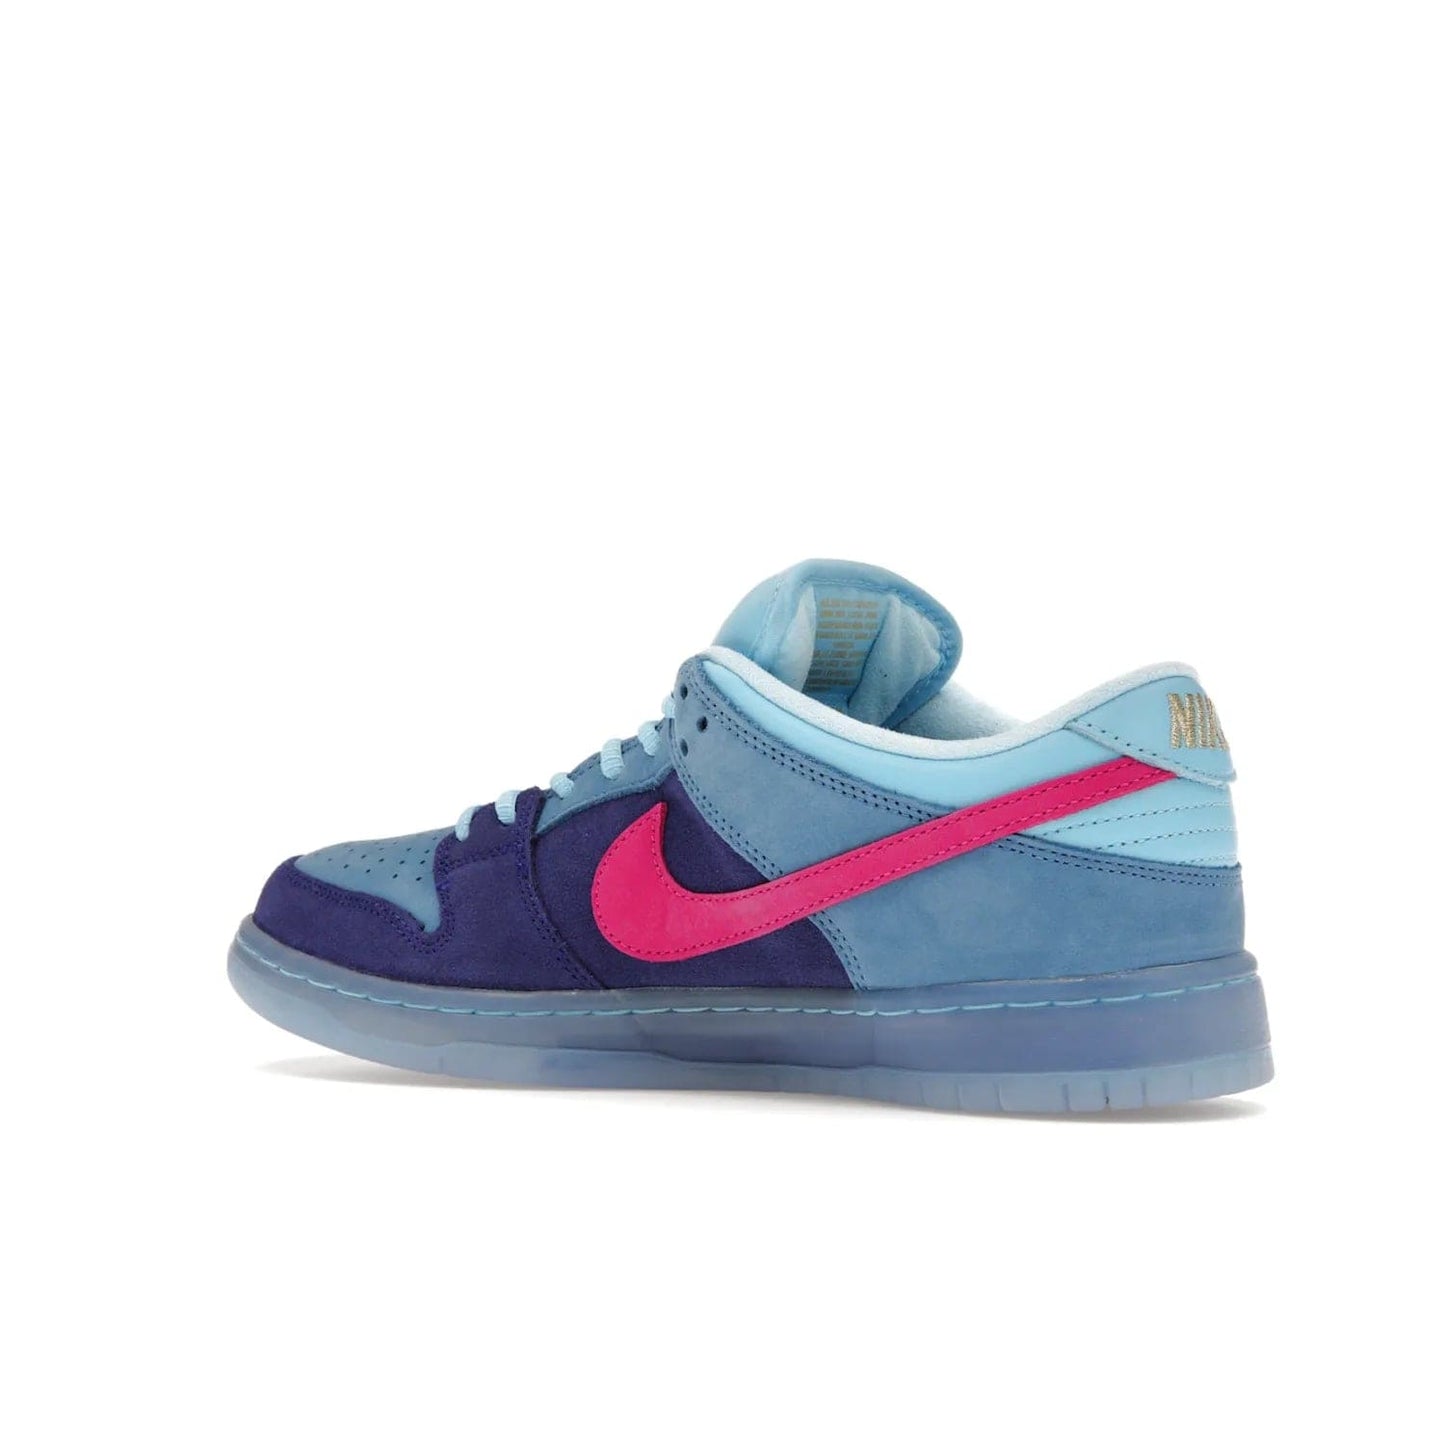 Nike SB Dunk Low Run The Jewels - Image 22 - Only at www.BallersClubKickz.com - The Nike SB Dunk Low Run The Jewels pays tribute to the Run the Jewels 3 album cover. It features a blue suede upper with pink suede accents, gold branding and 3 lace sets. RTJ insoles complete this limited edition sneaker. Get it now for your shoe collection.